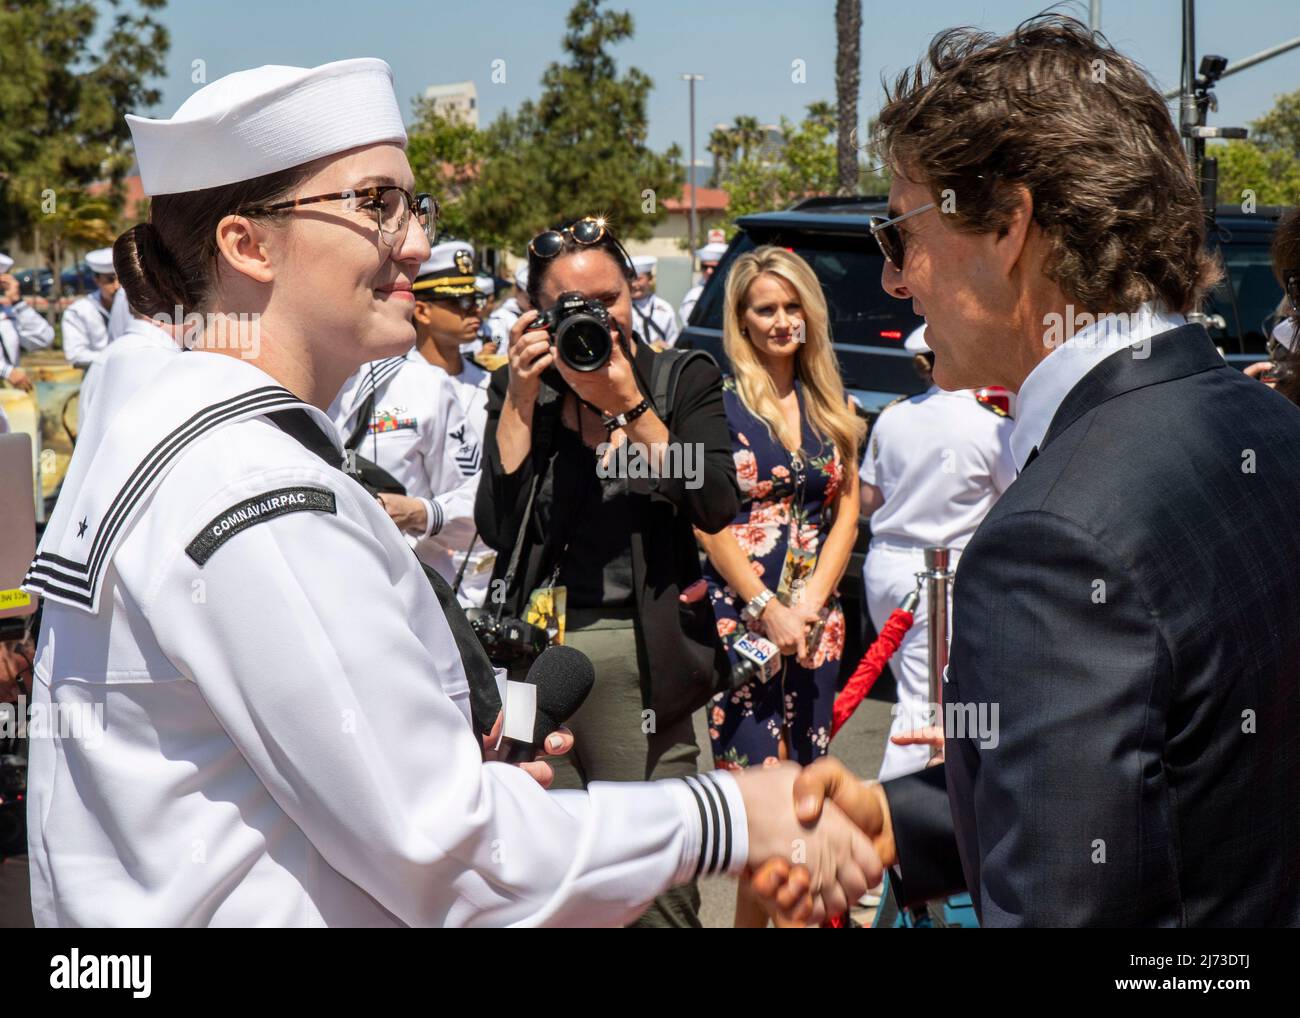 San Diego, United States. 04 May, 2022. American actor Tom Cruise shakes hands with U.S. Navy sailor Chelsea Meiller, left, on the red carpet during the advance movie premiere of Top Gun: Maverick, at Naval Air Station North Island, May 4, 2022 in San Diego, California, Top Gun: Maverick, is the sequel to the 1986 blockbuster, Top Gun and will be released worldwide on May 27.  Credit: MC2 Keenan Daniels/US Navy/Alamy Live News Stock Photo